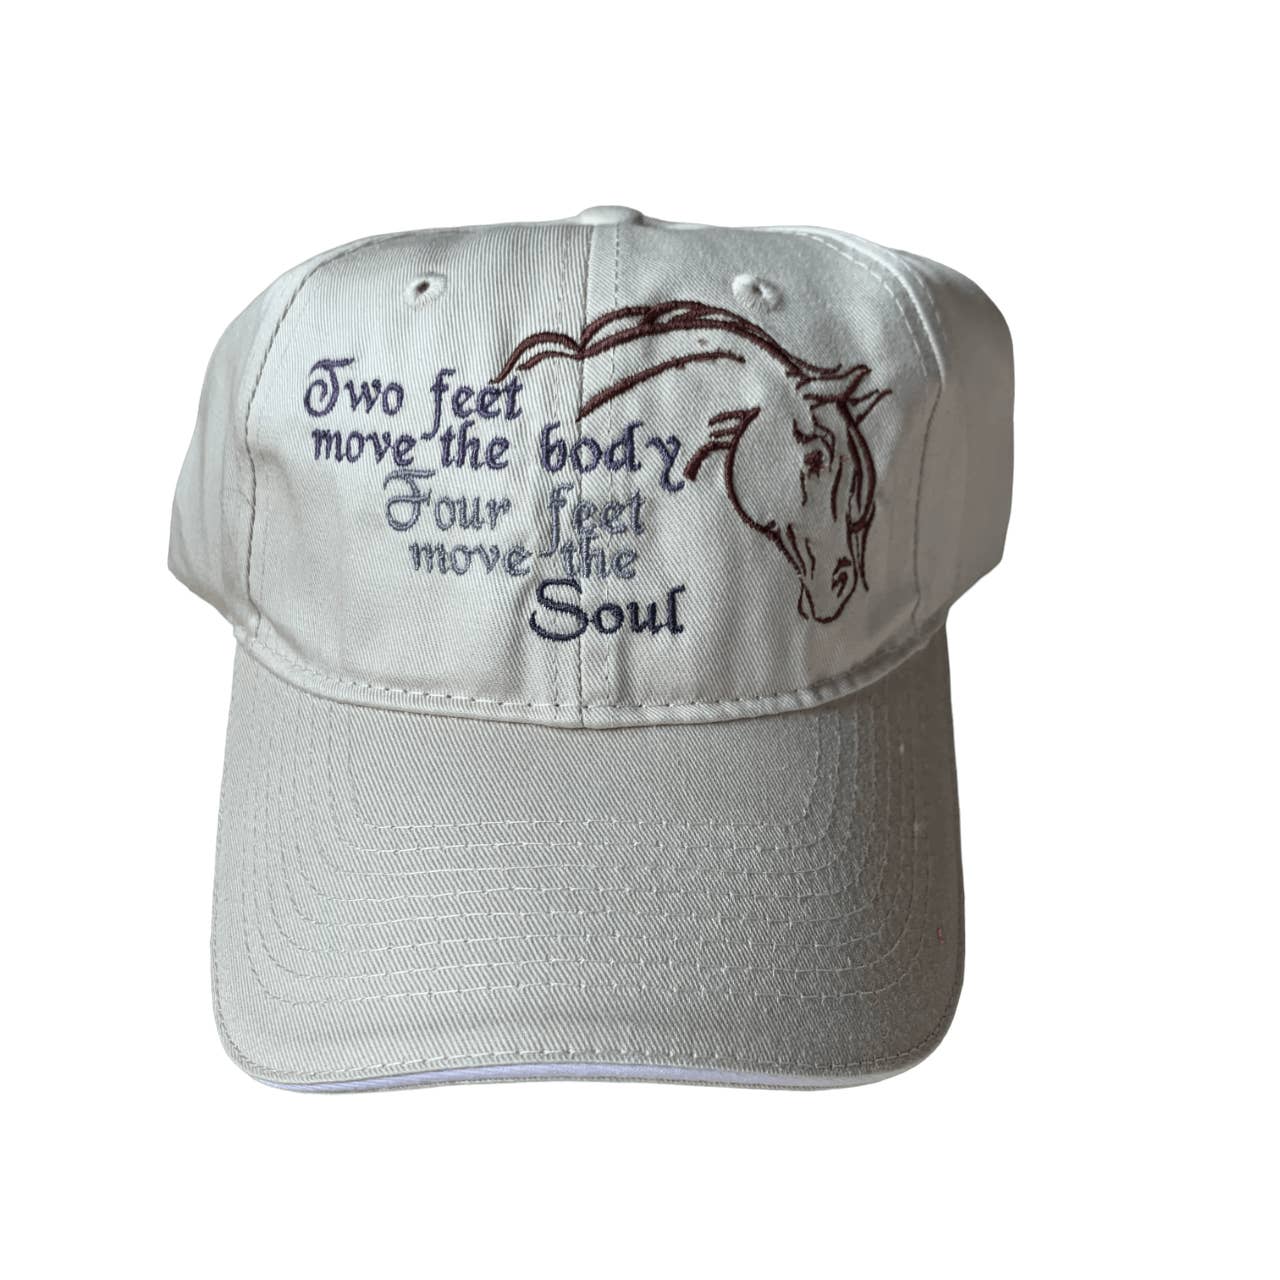 'Two Feet Move the Body, Four Feet Move the Soul' Embroidered Baseball Cap